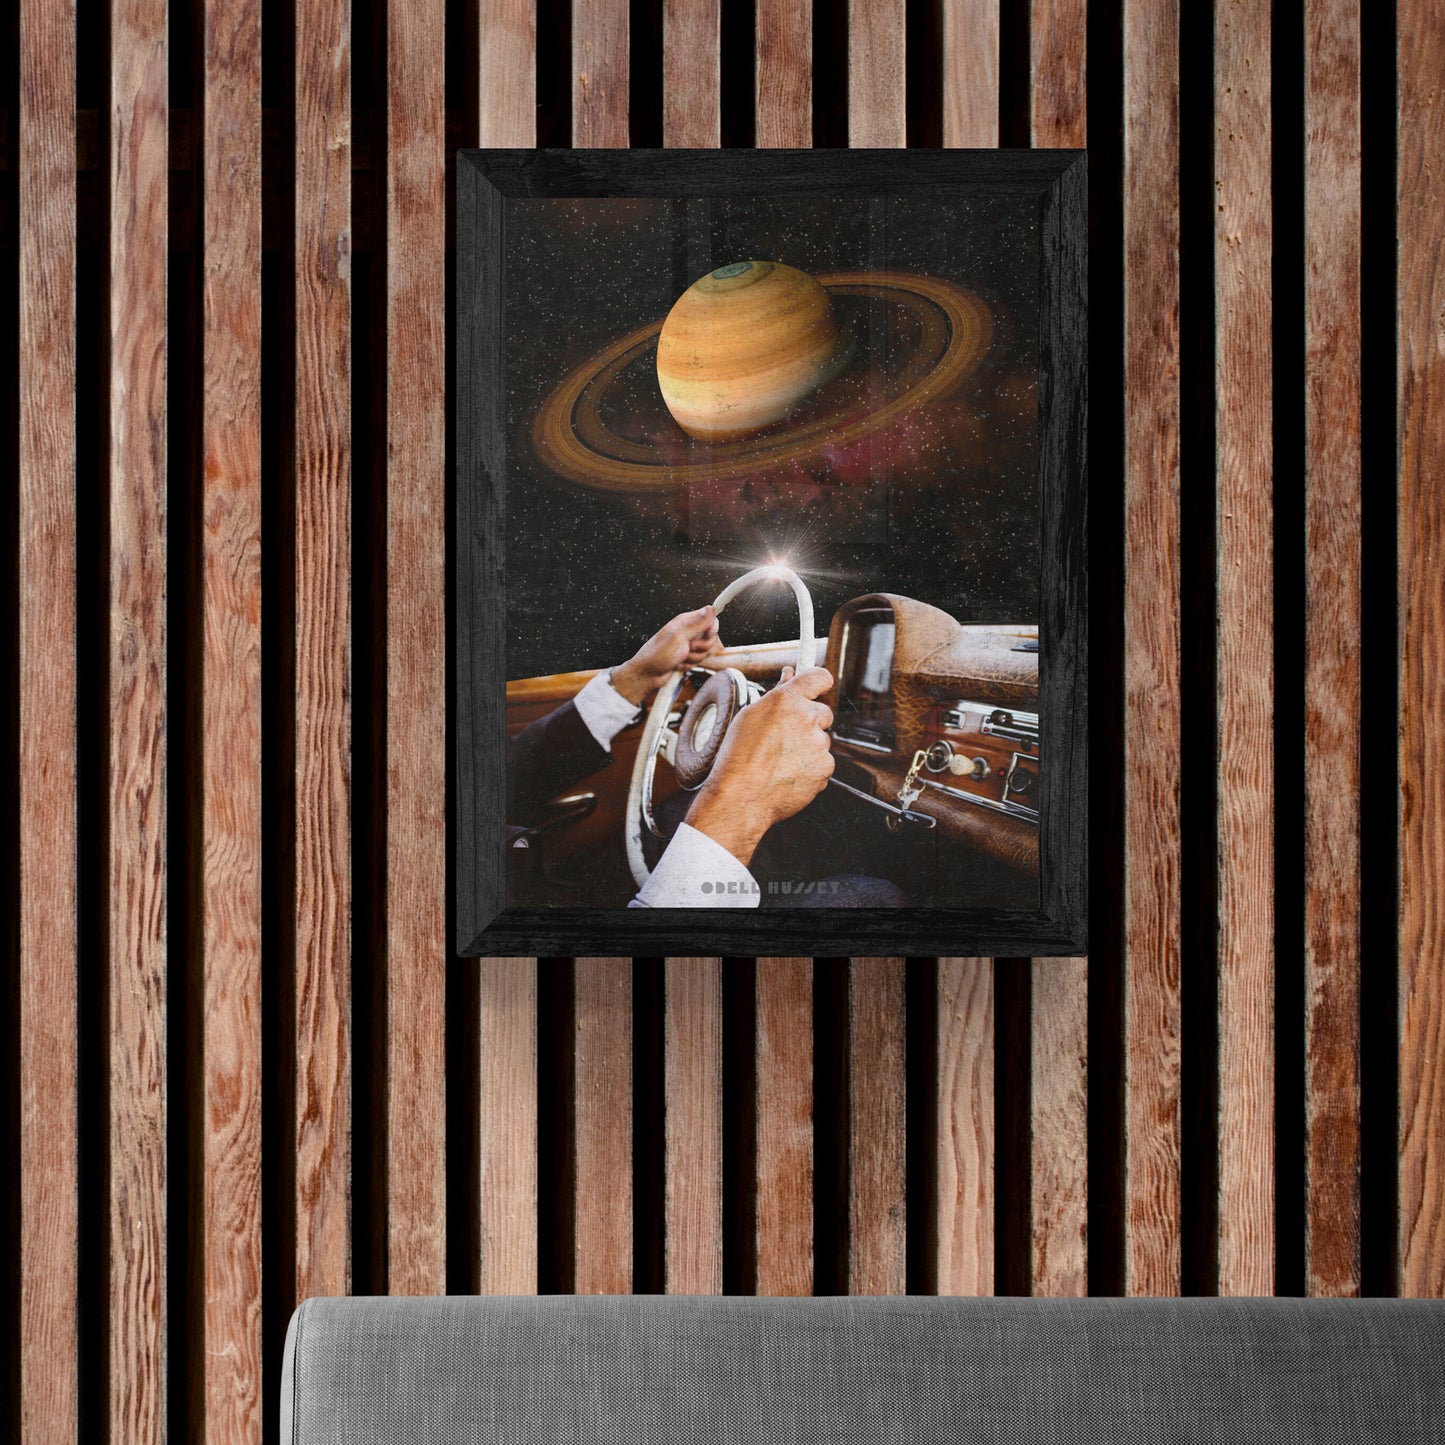 Saturn Cruise 18X24 Inch Poster Print for Sci-Fi & Surreal Art Fans